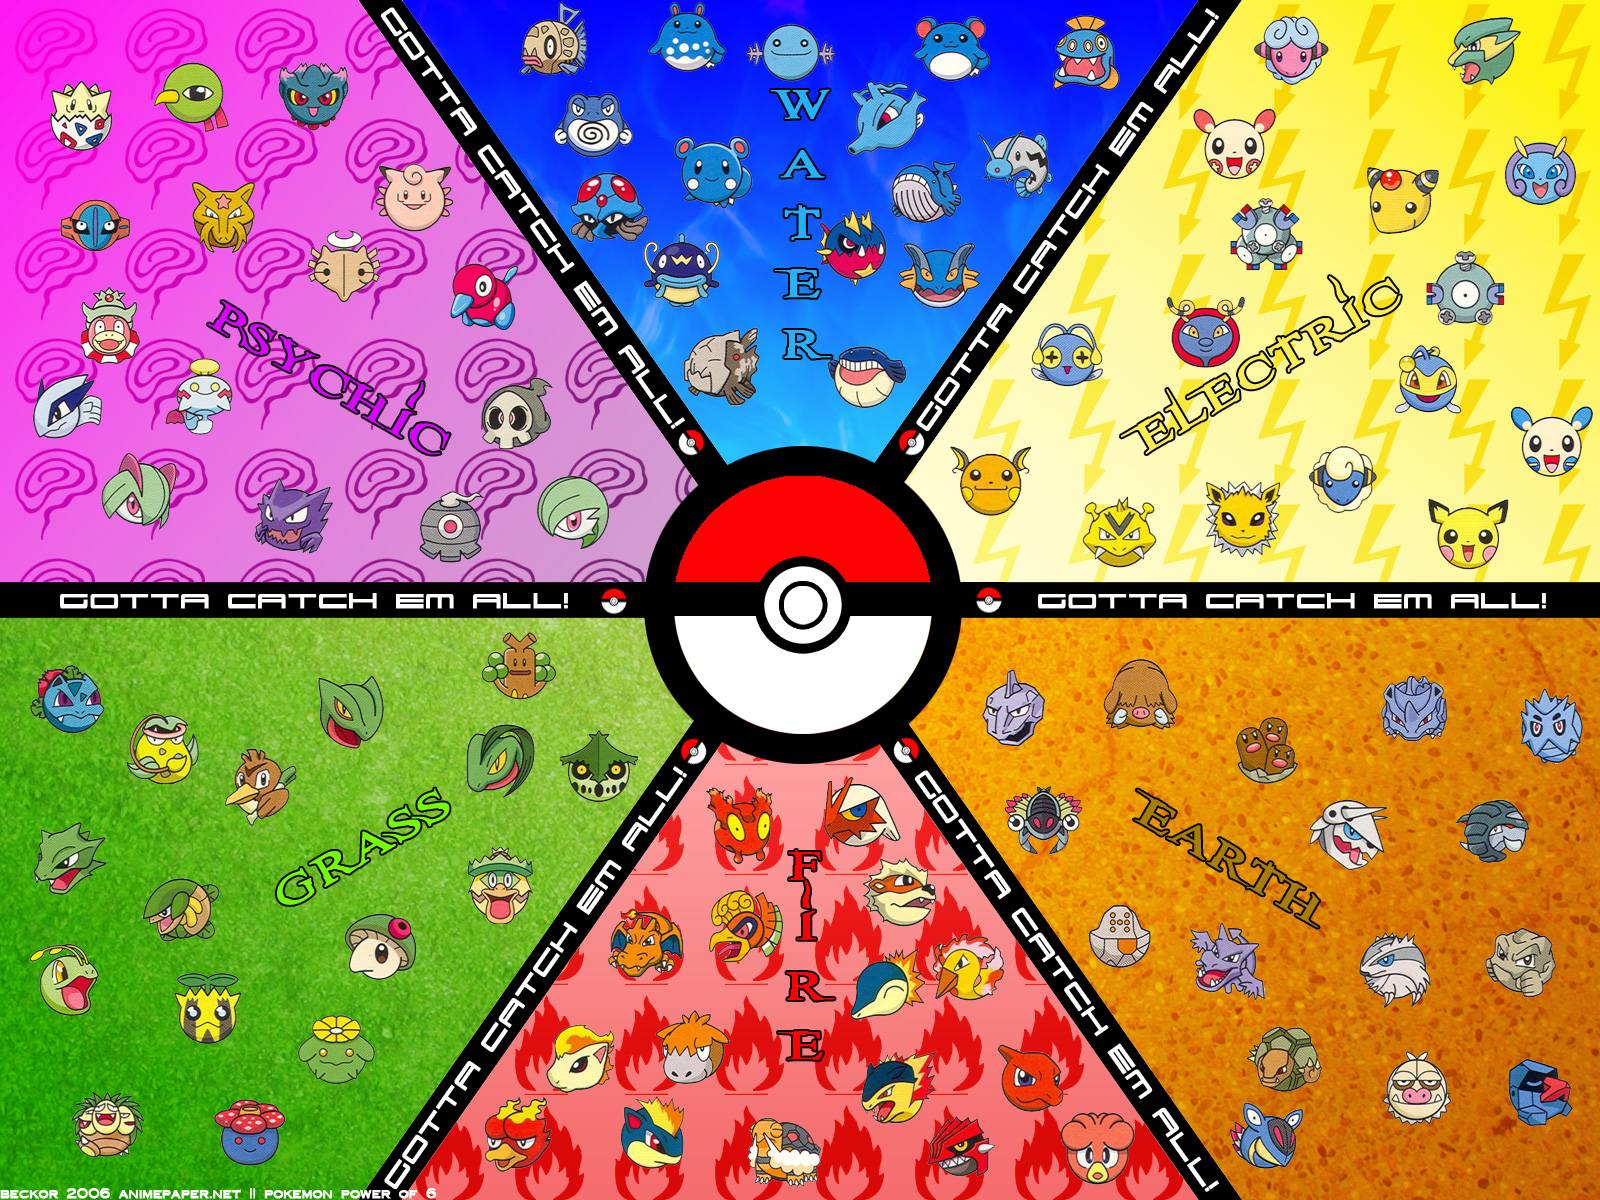 all pokemon names with pictures